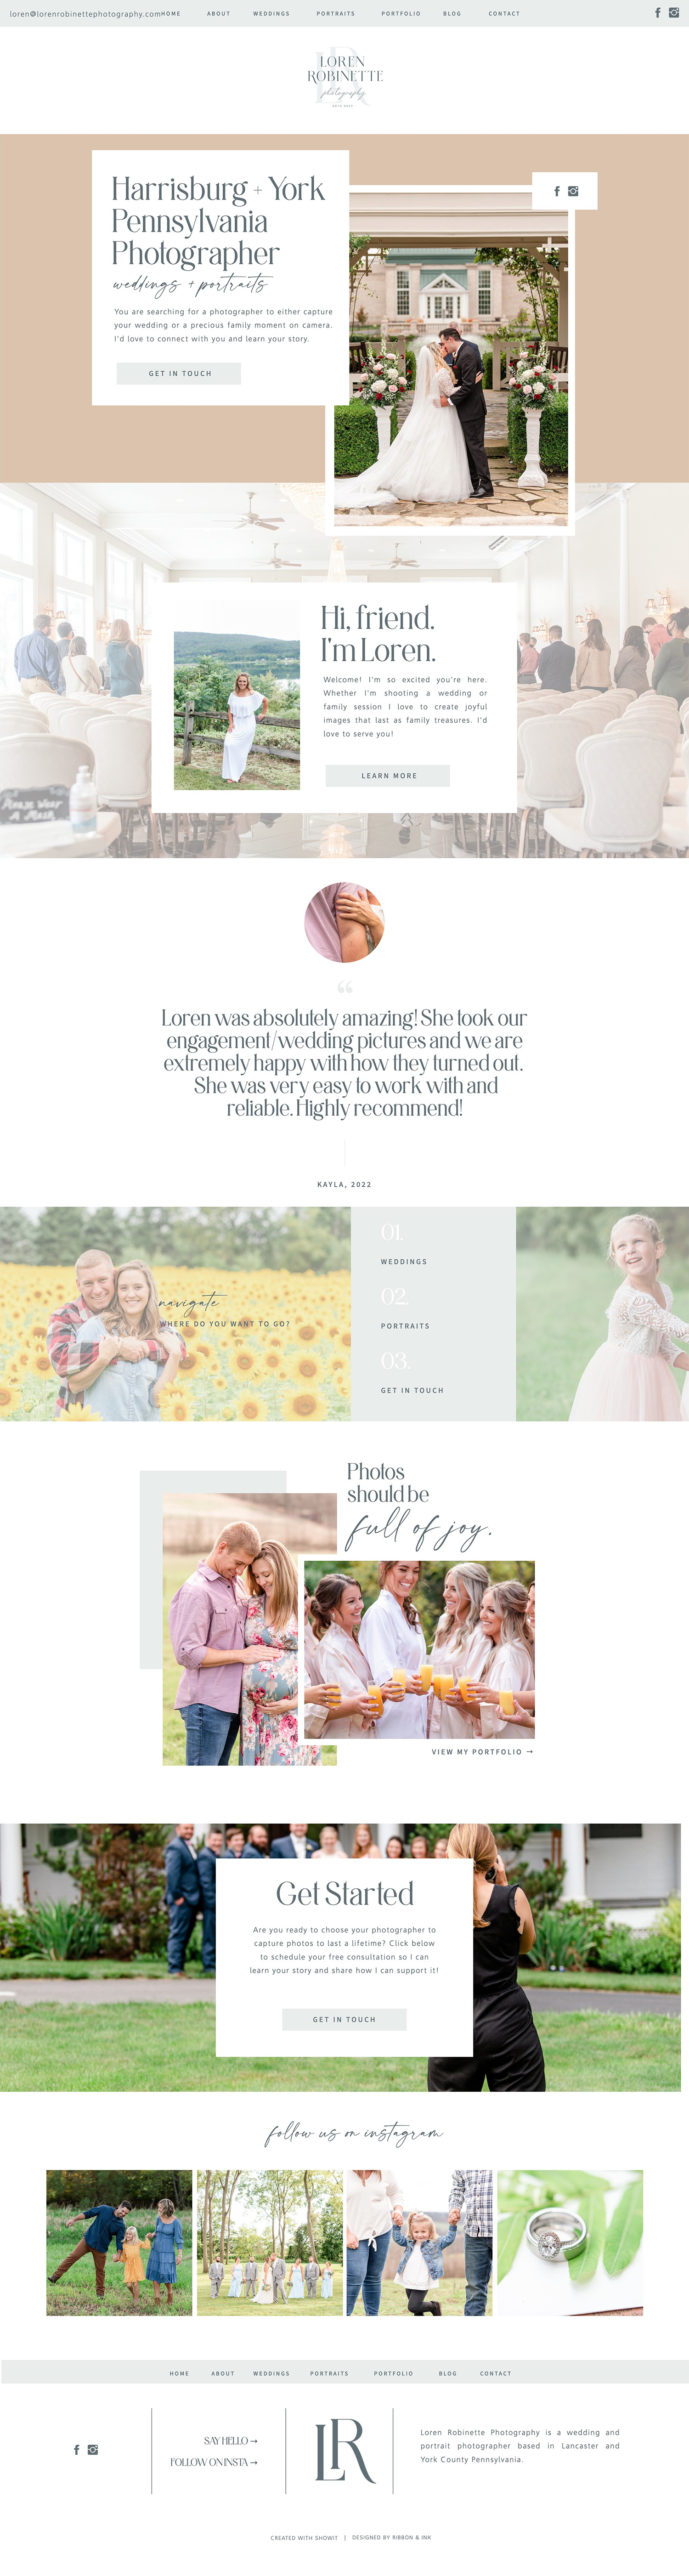 showit website template for creatives and wedding pros / branding for wedding businesses and creatives / wedding photographer 